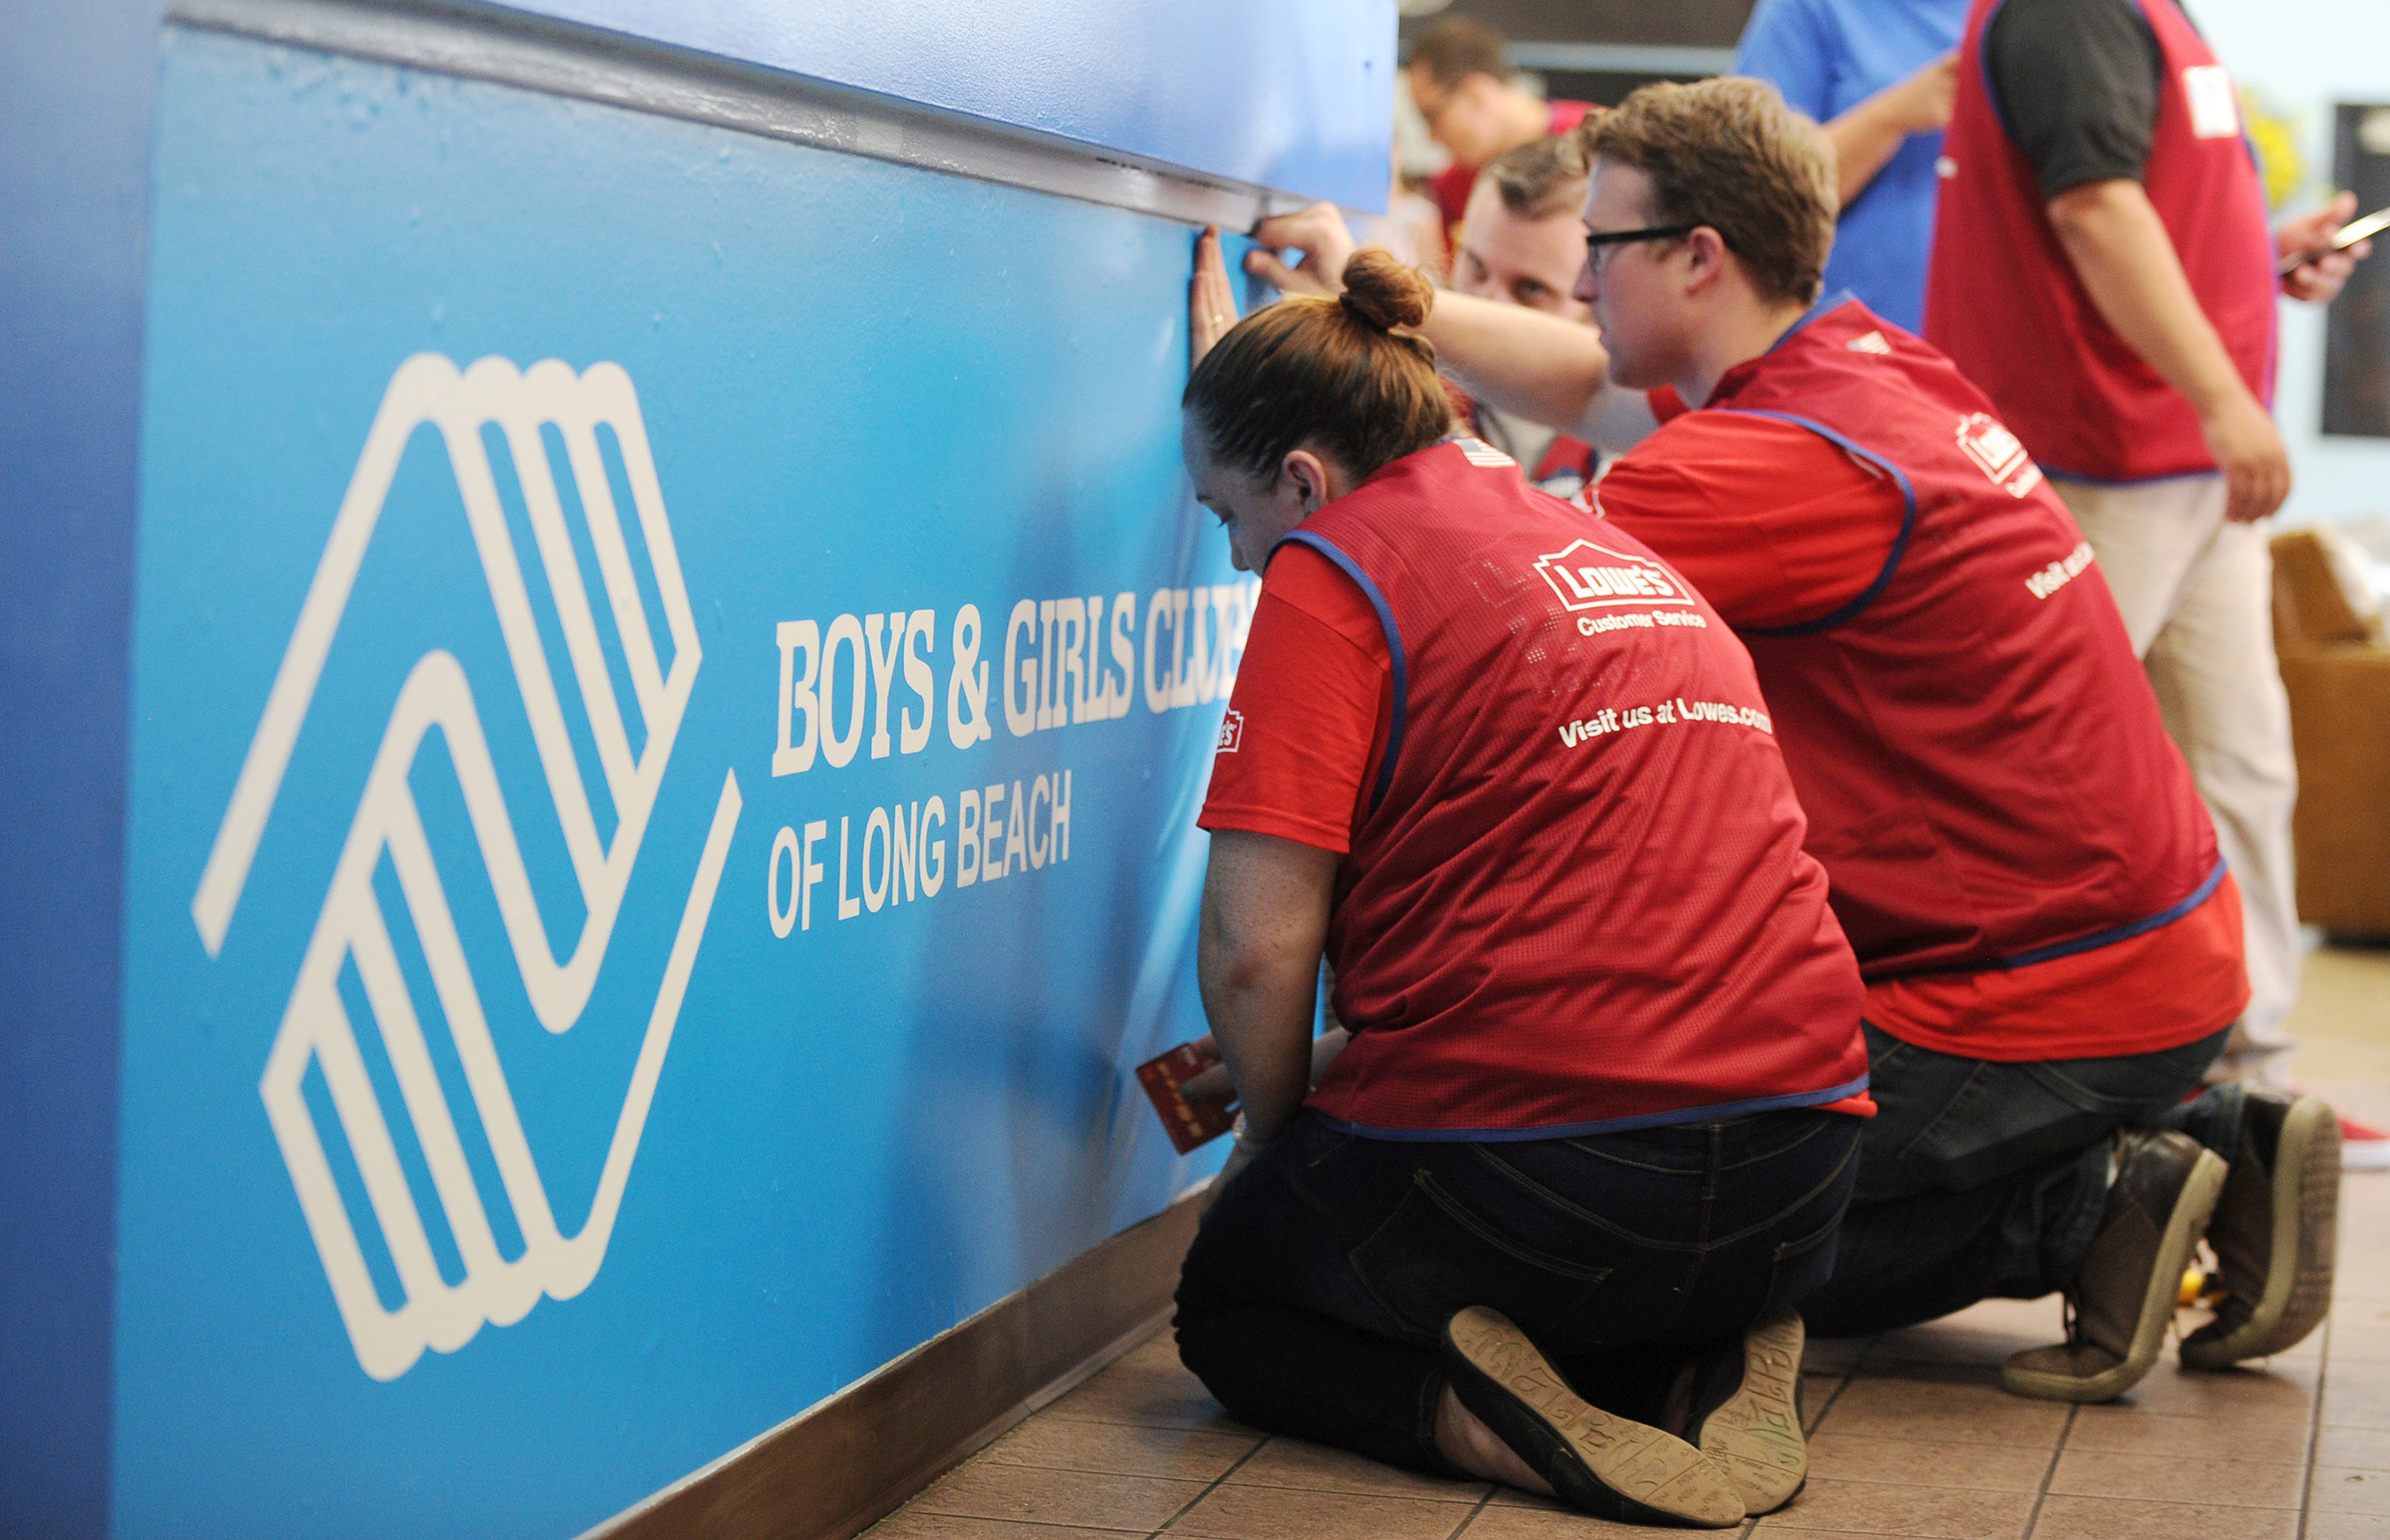 Lowe's Heroes, the retailer's employee volunteer force, work to spruce up the Fairfield/Westside Boys & Girls Club with new paint, blinds, furniture, and outdoor landscaping projects.